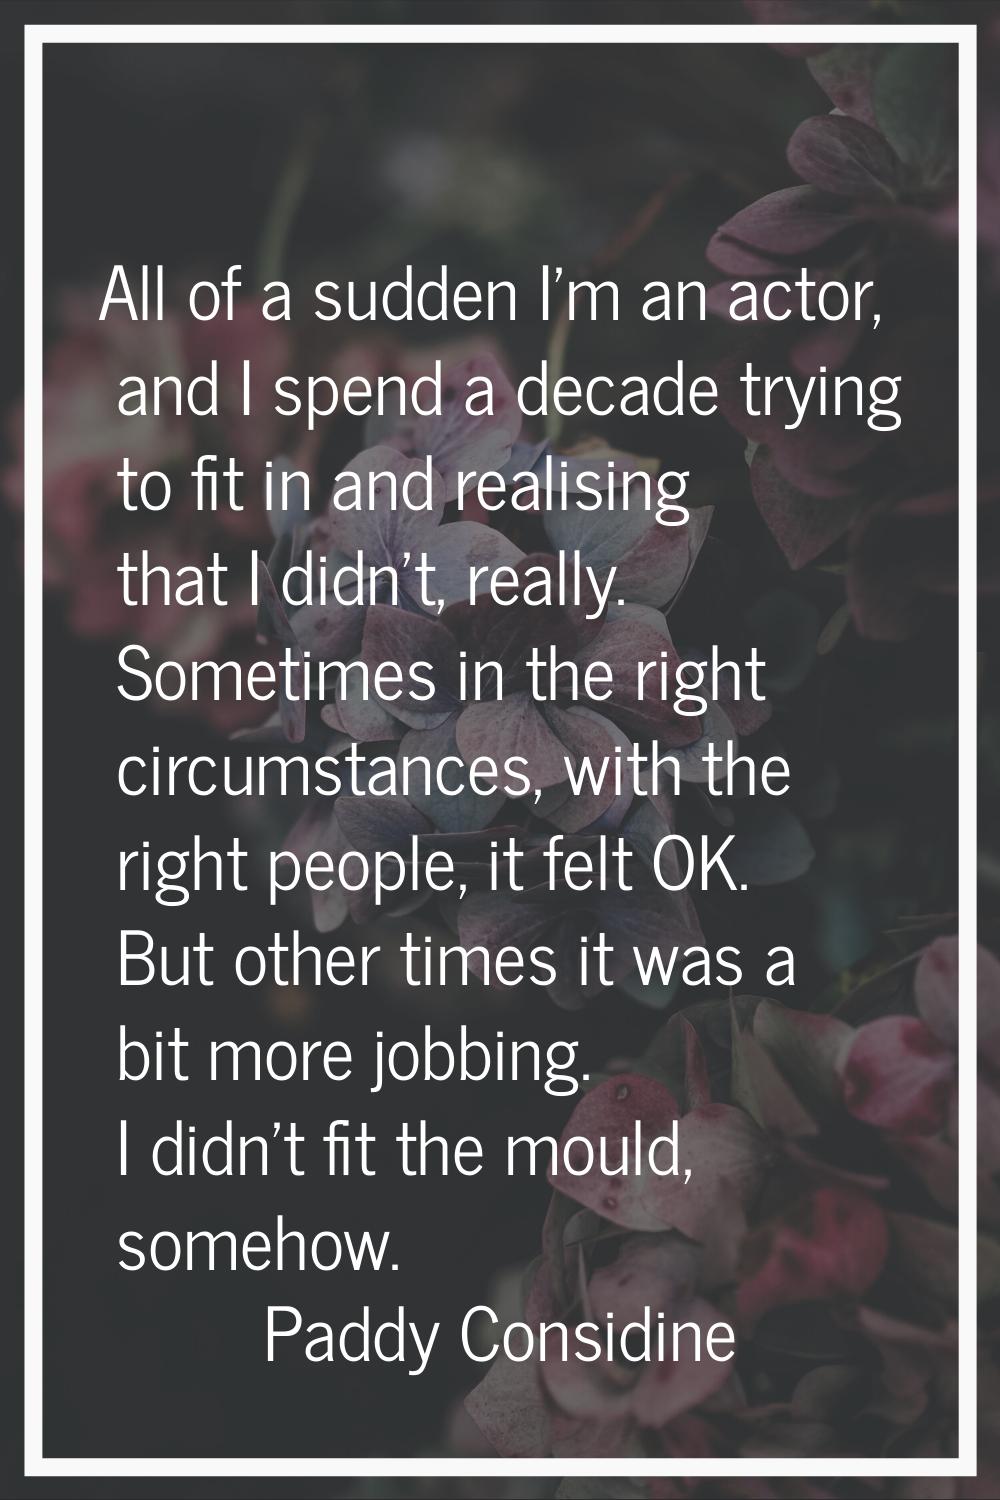 All of a sudden I'm an actor, and I spend a decade trying to fit in and realising that I didn't, re